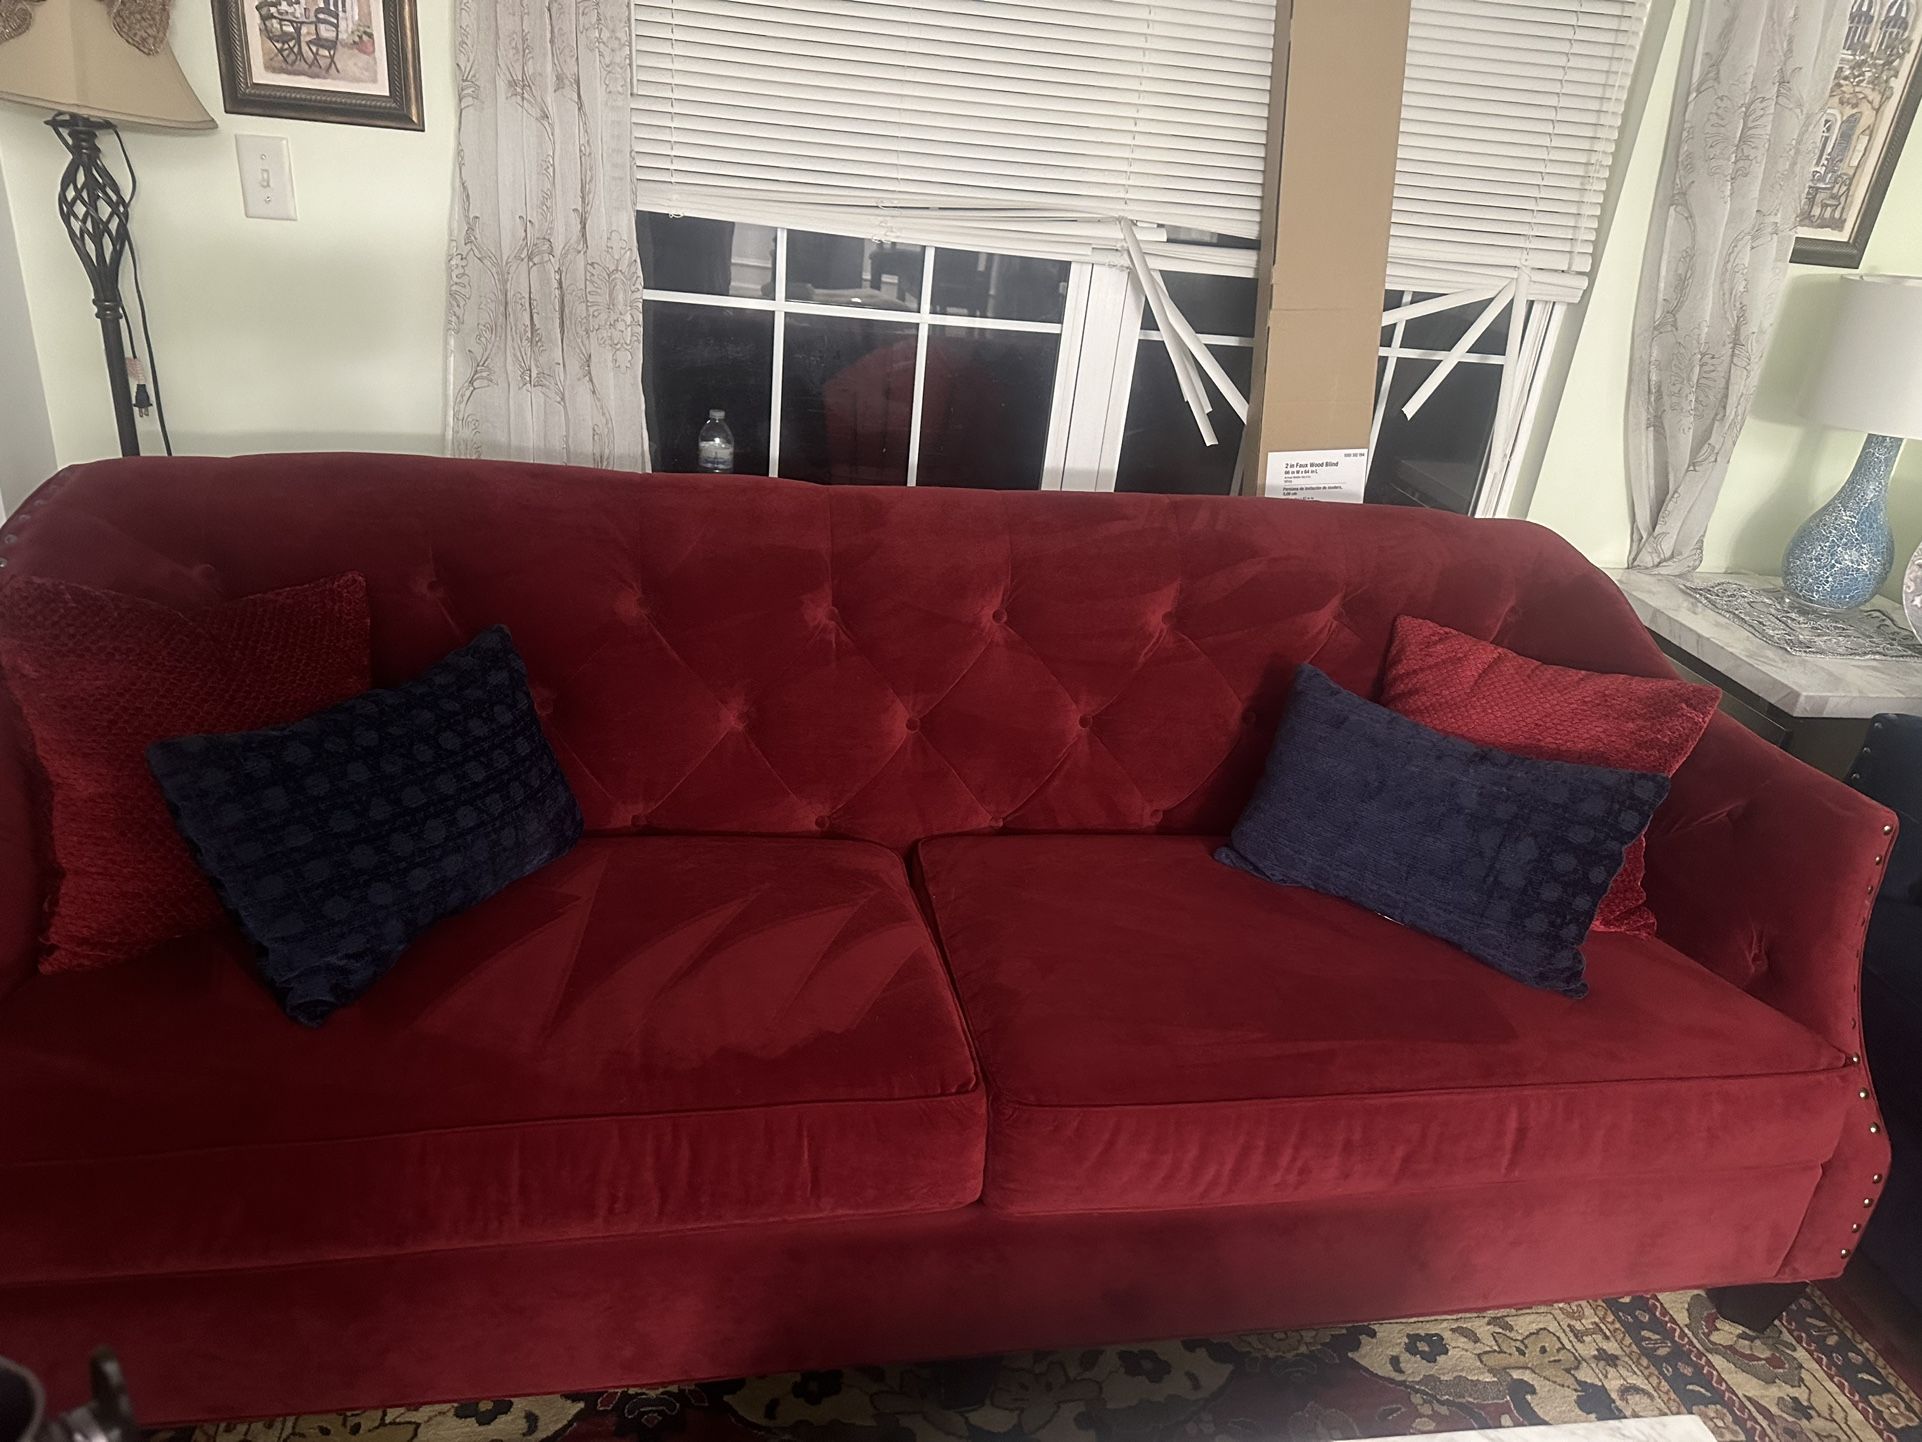 Two sofas in excellent condition, made of navy blue and burgundy velvet